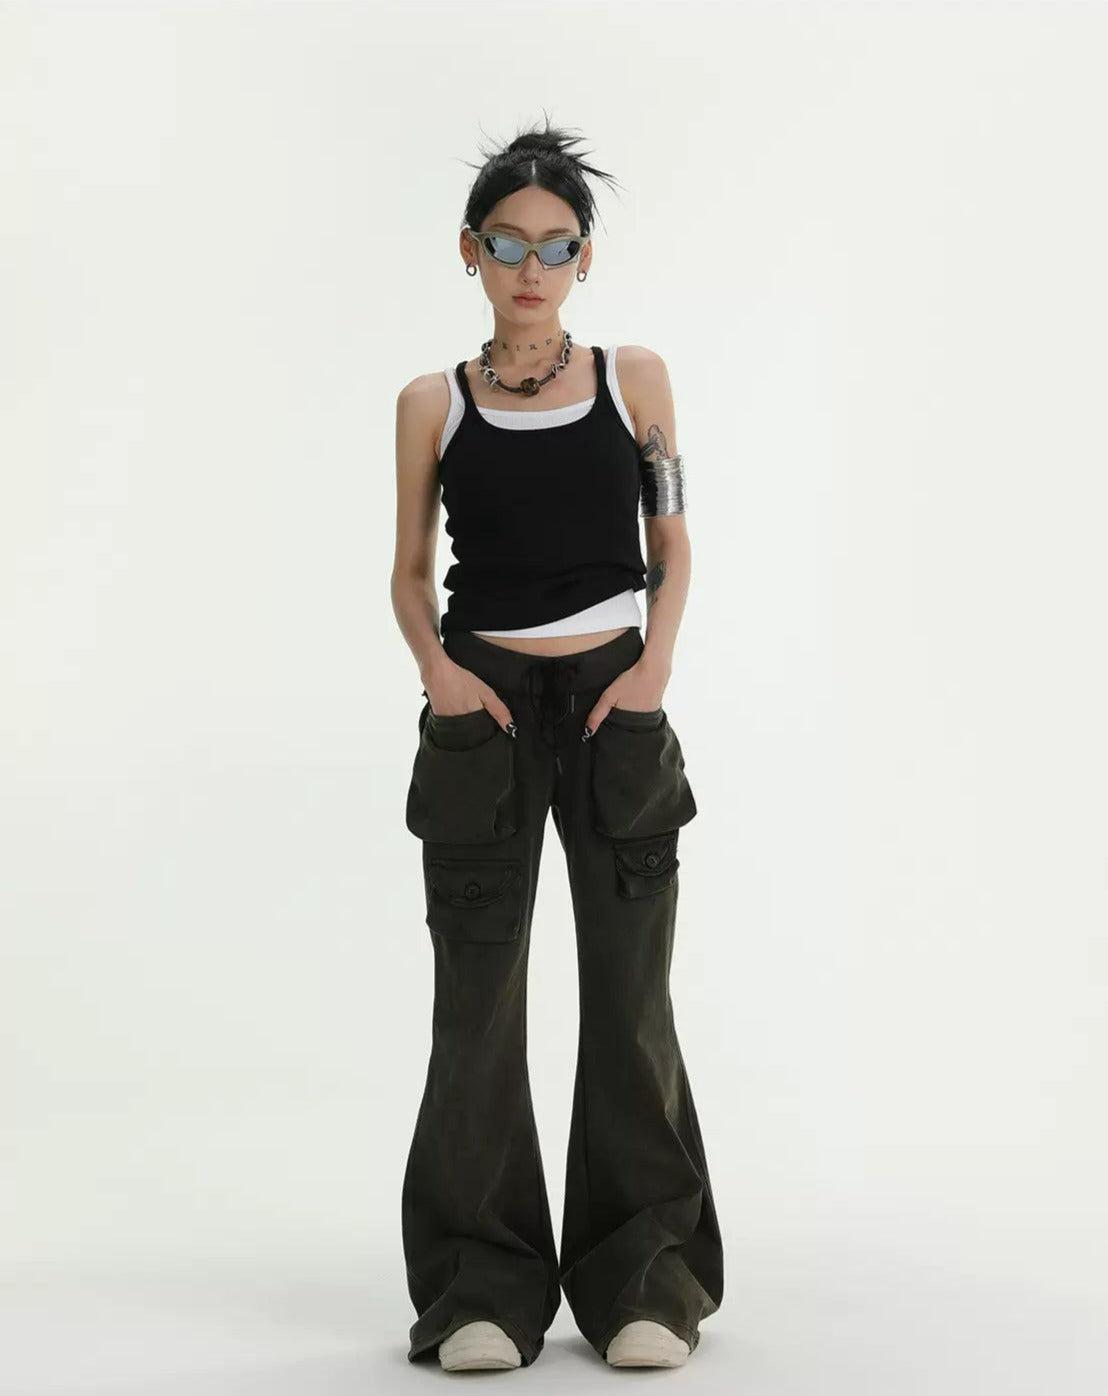 Ace Heavy Washed Bell-Bottom Pants-korean-fashion-Pants-Ace's Closet-OH Garments